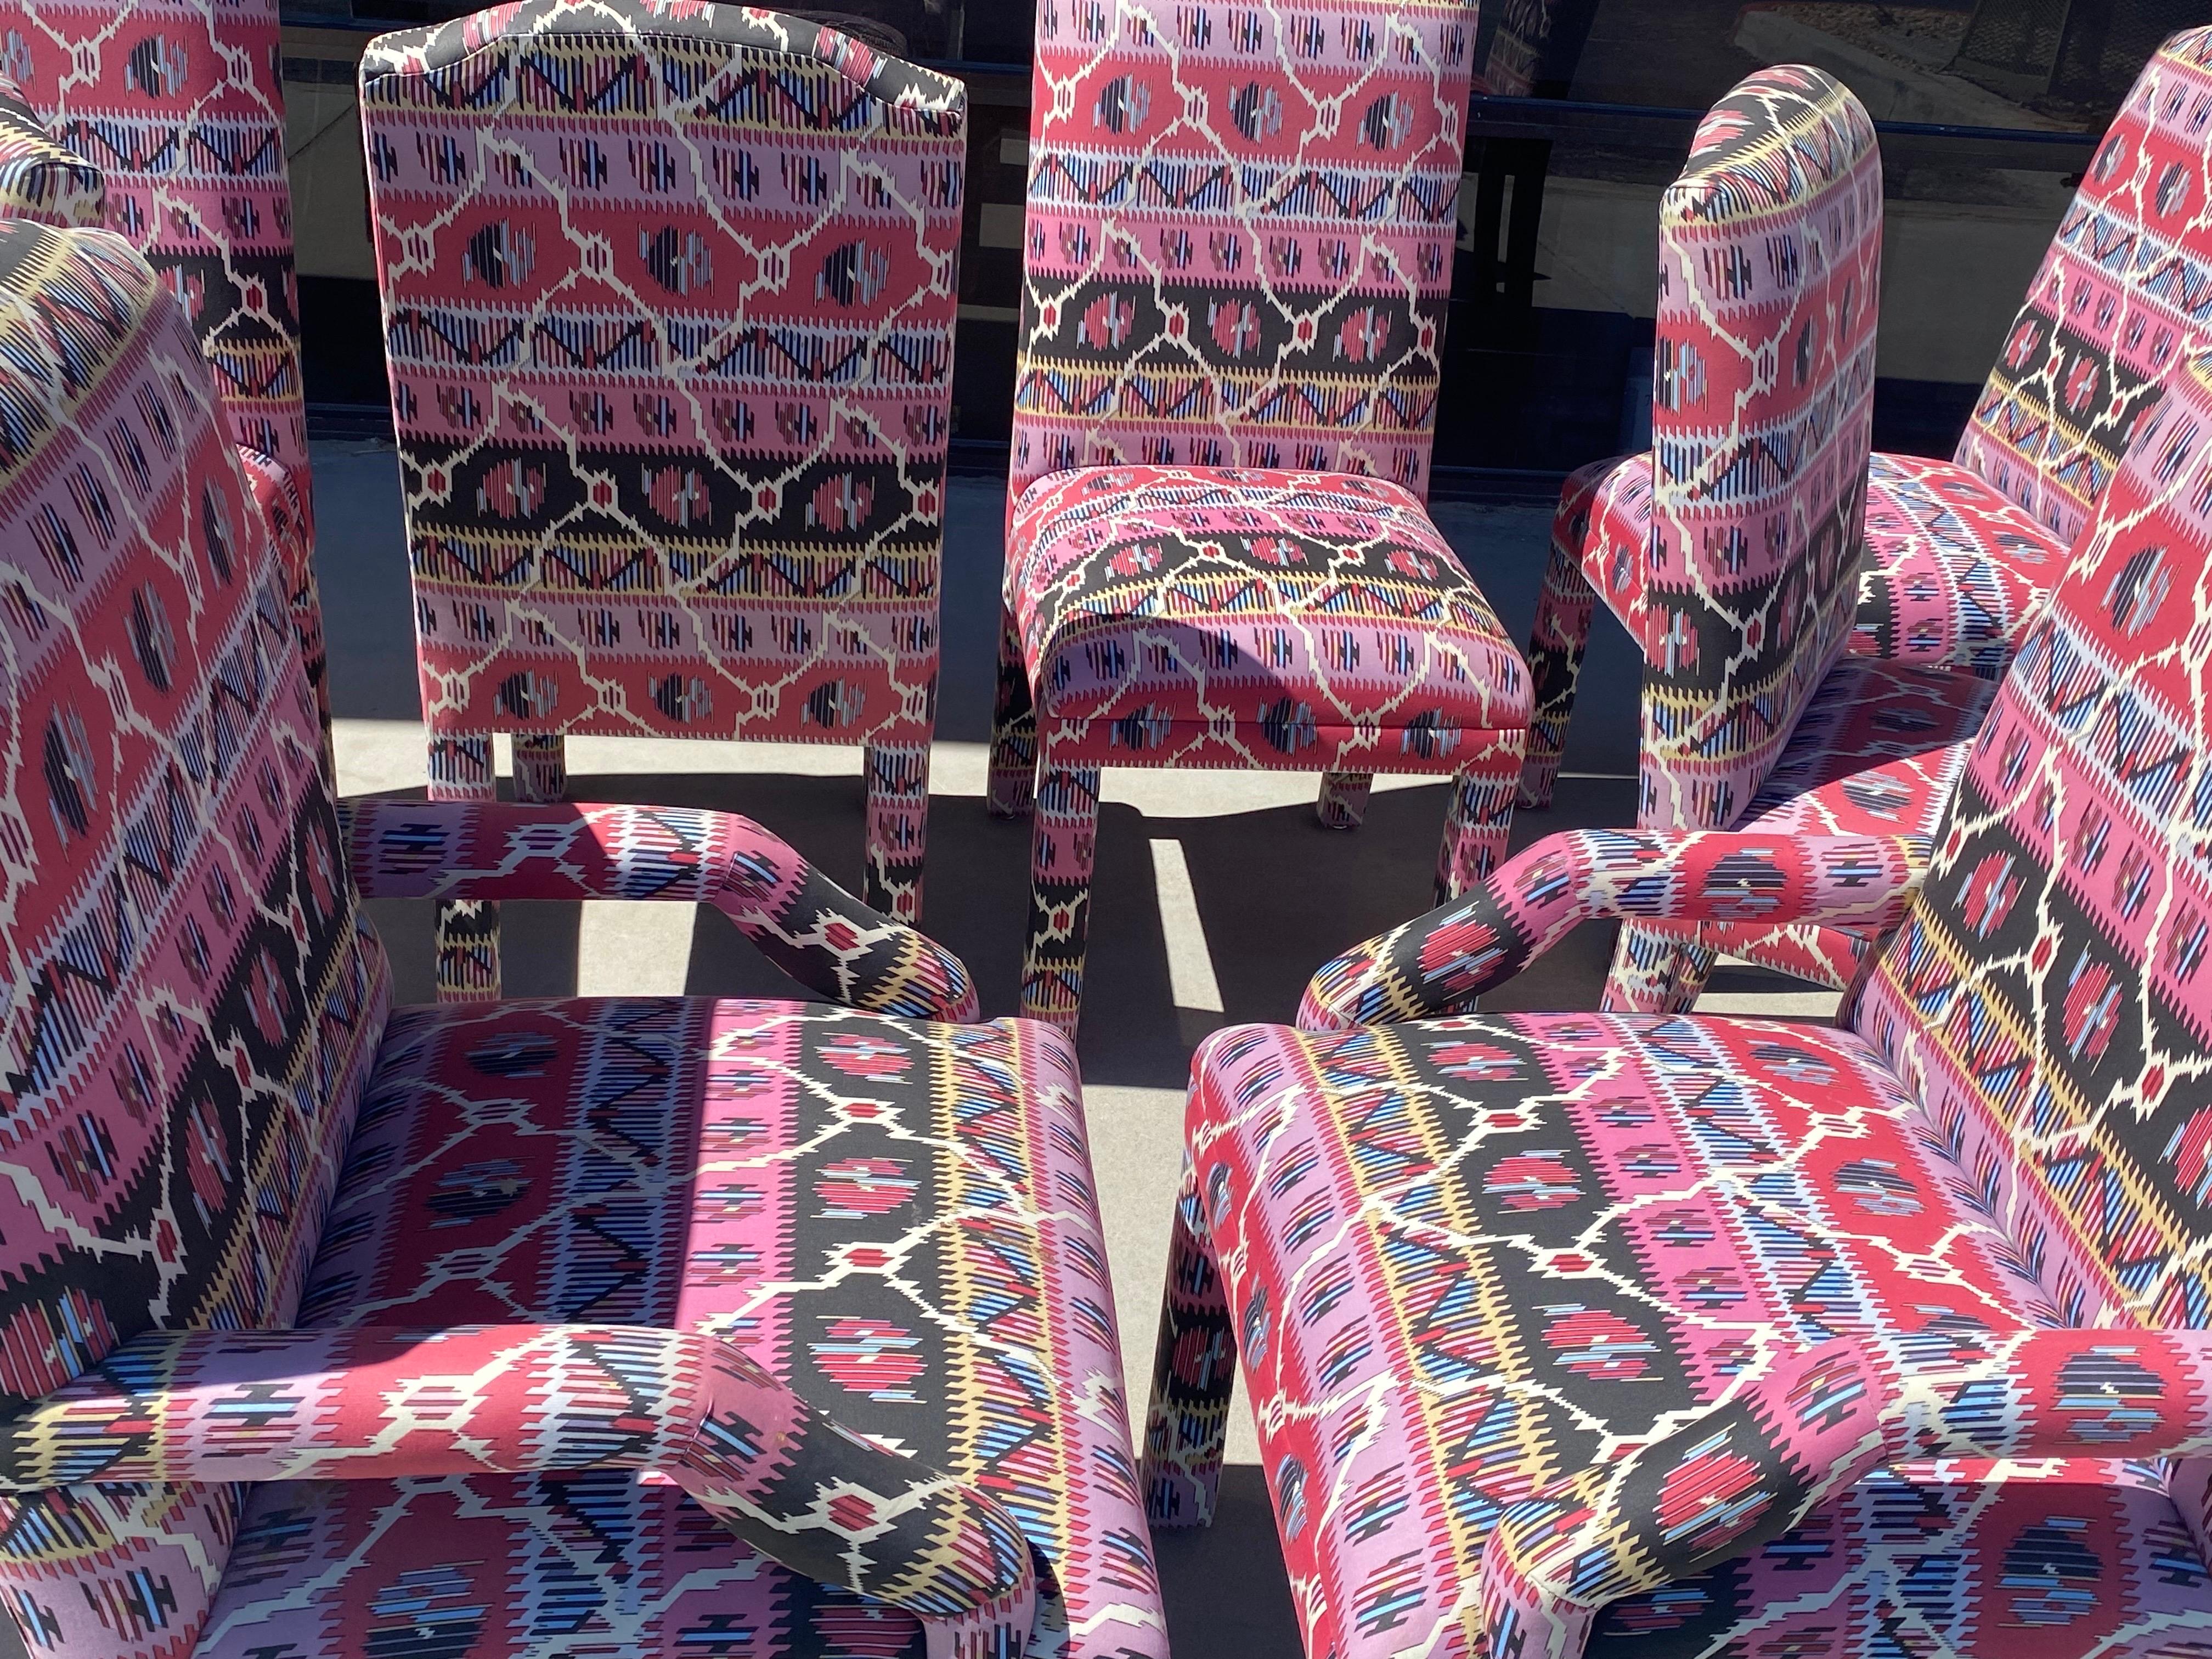 These beautiful dining chairs were custom-made for a high-end residence in Rancho Mirage California. The coloration of the Bohemian print is amazing in pink, black and white. The set consists of six armless chairs and a pair of host chairs.
The